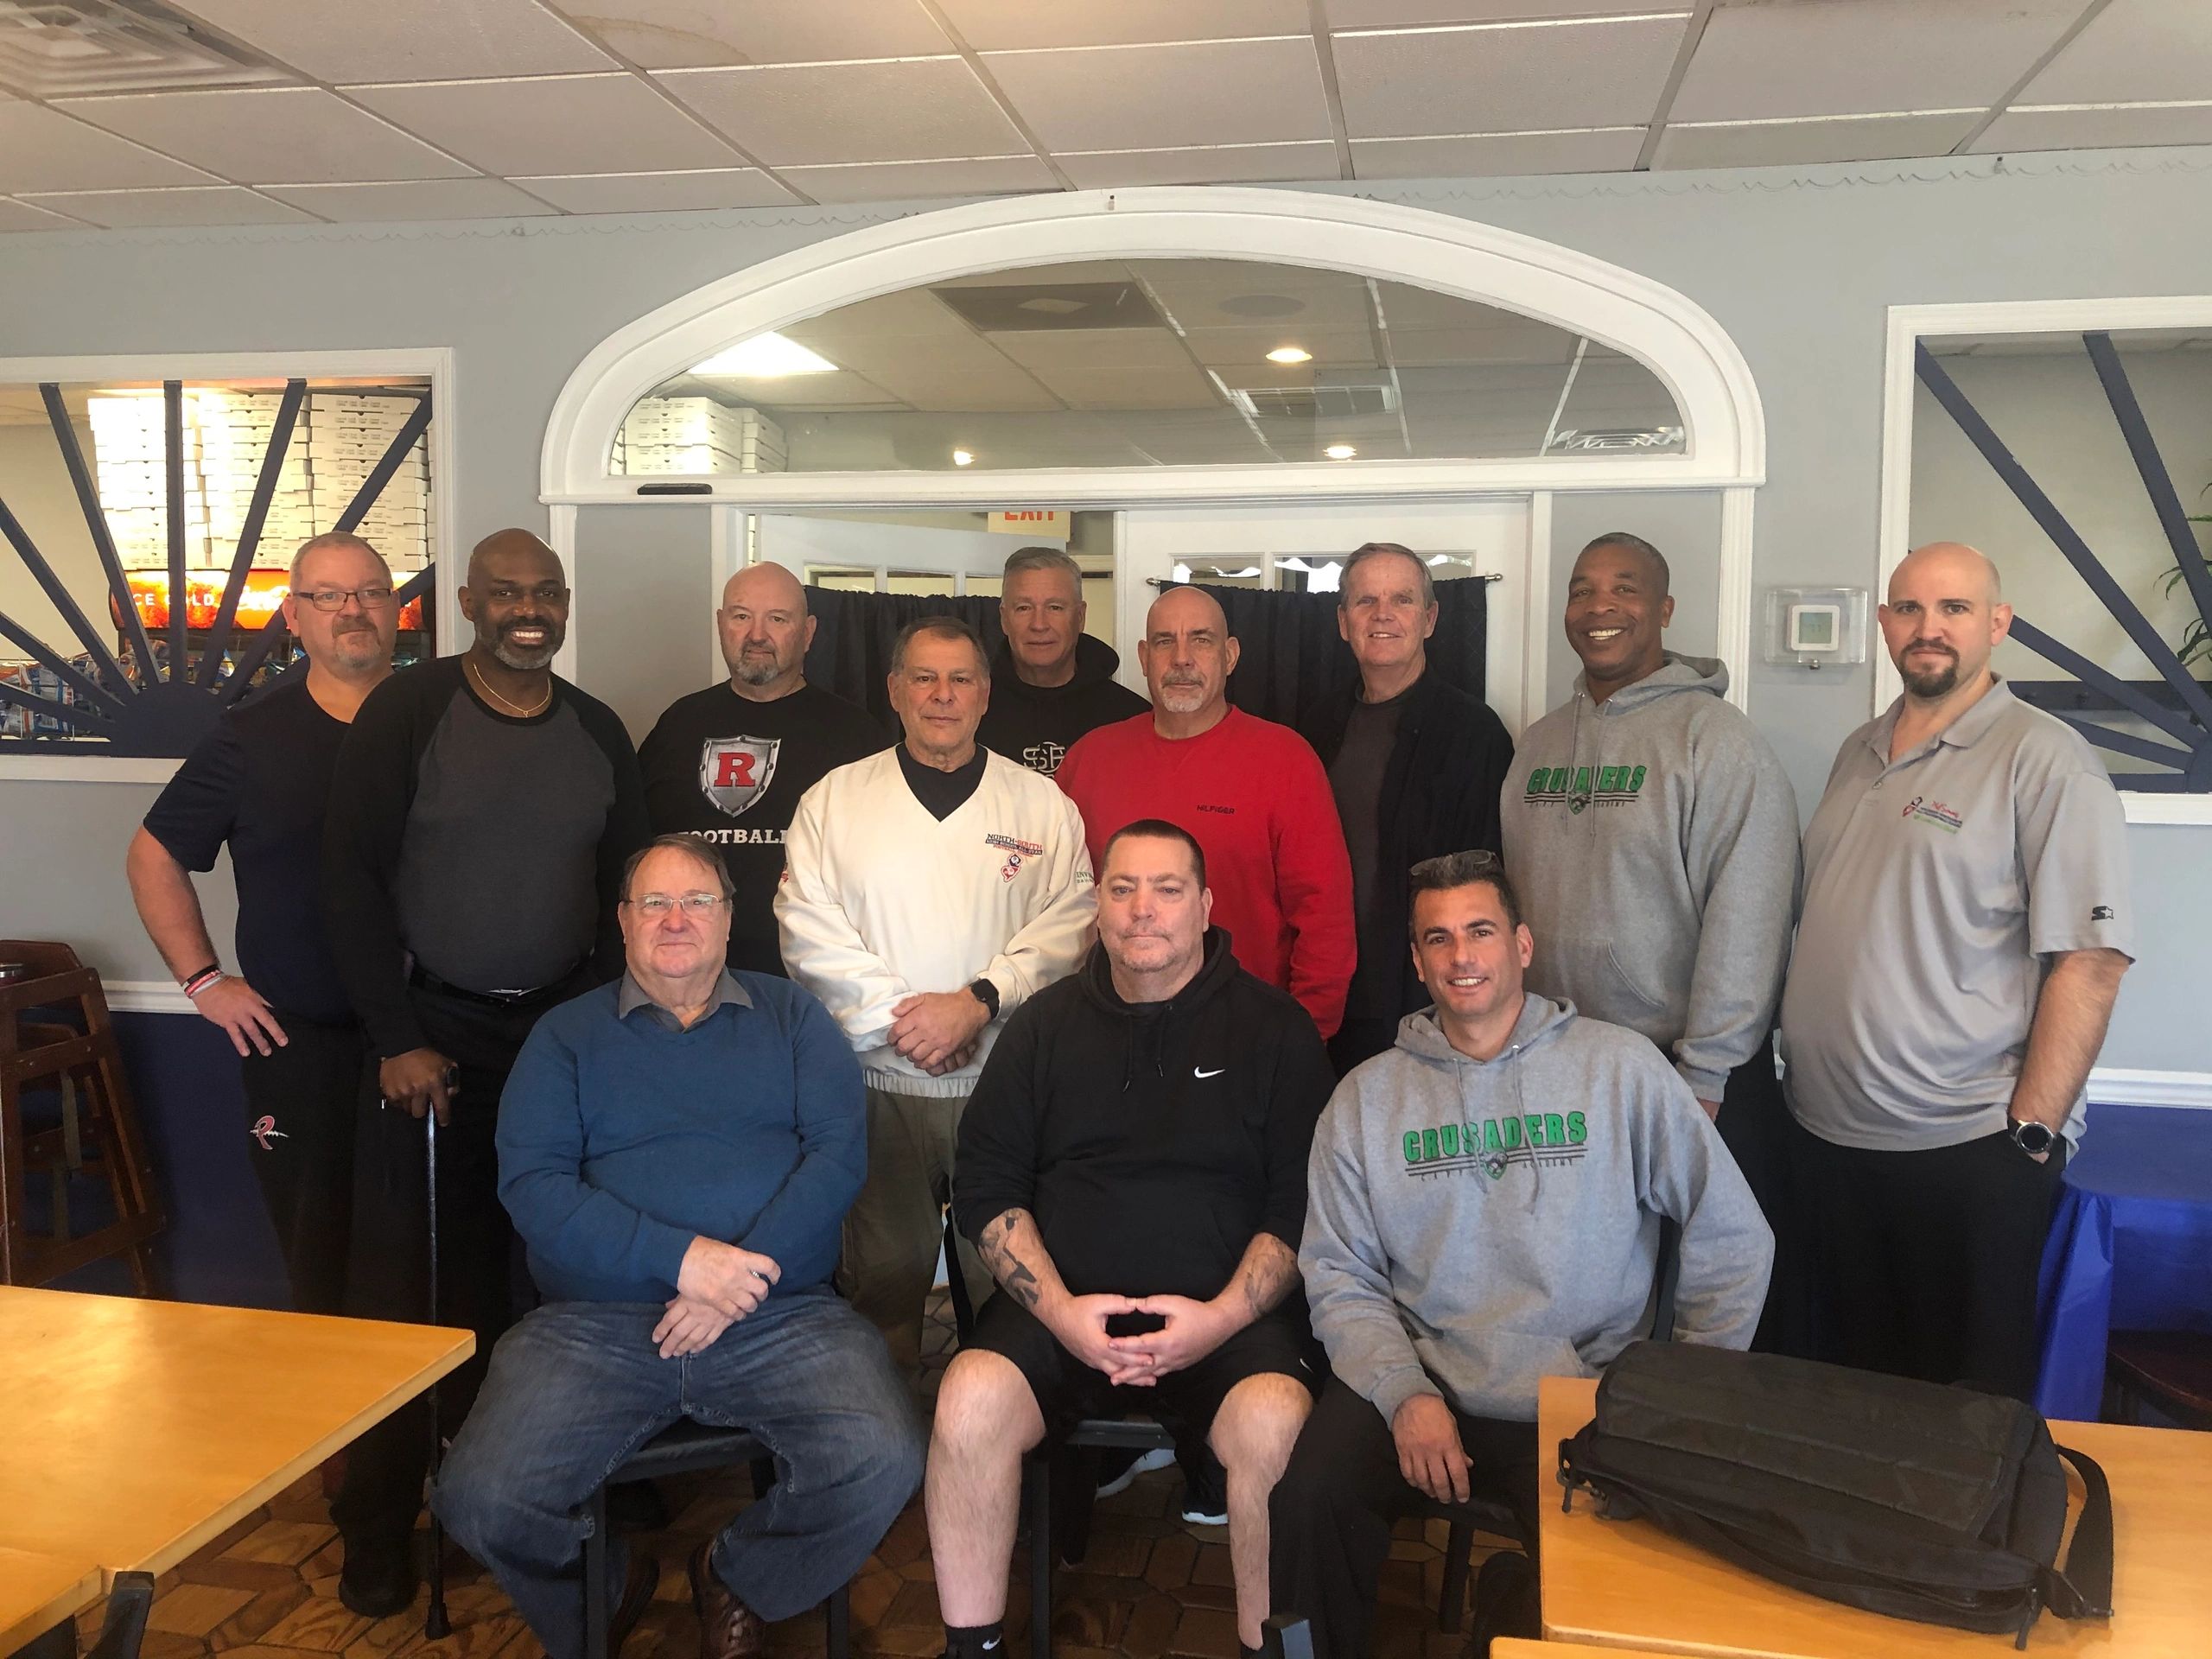 Phil Simms North/South All-Star Game Selection meeting